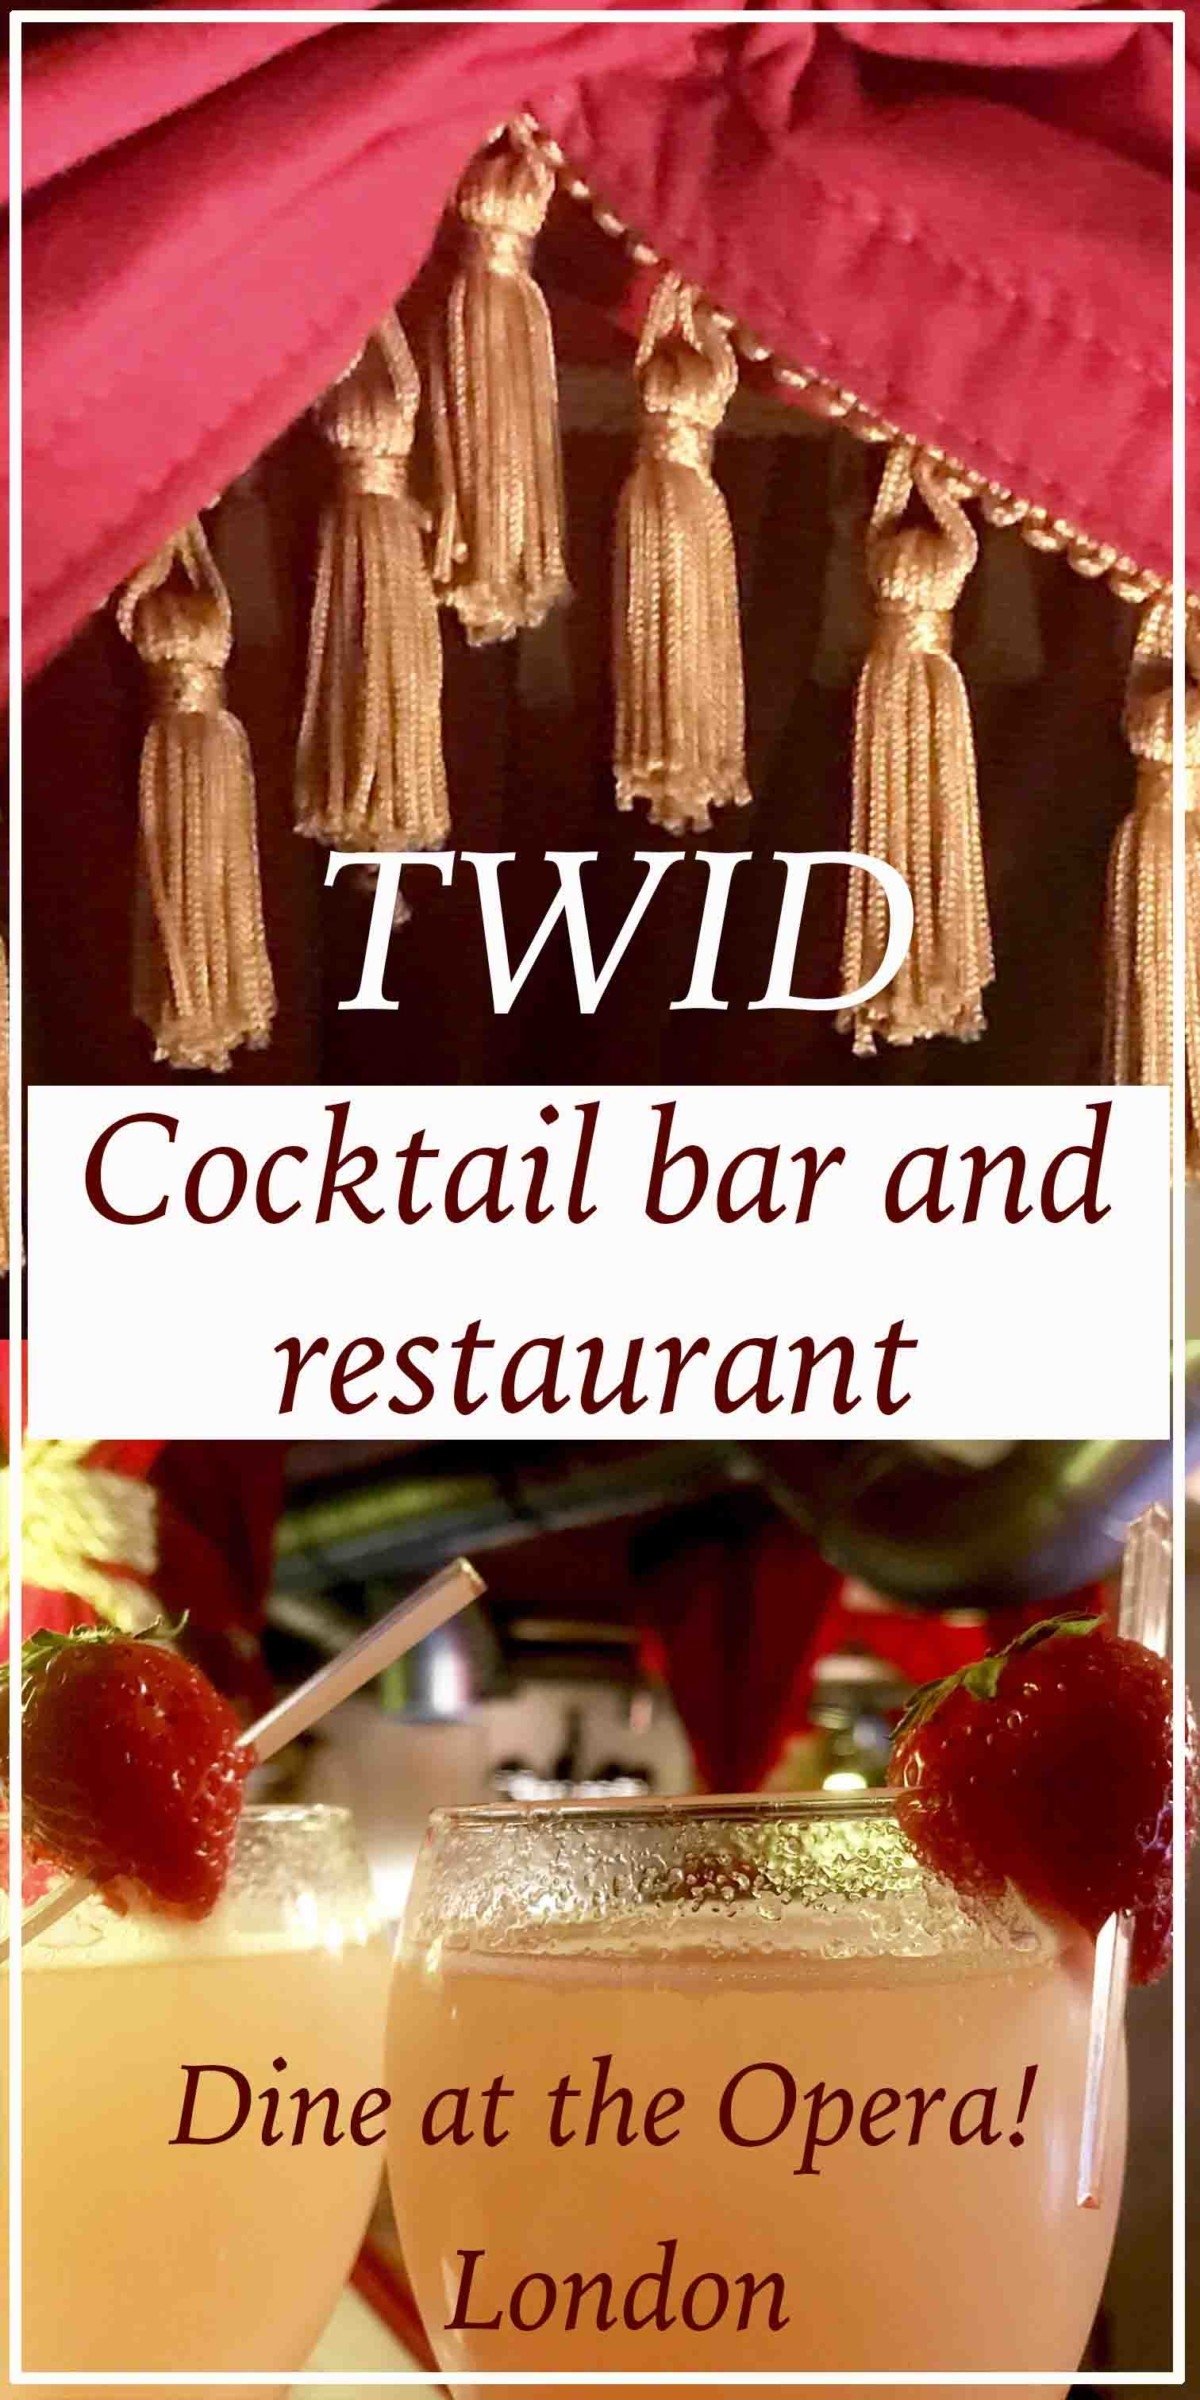 Twid Cocktail bar and restaurant Battersea.